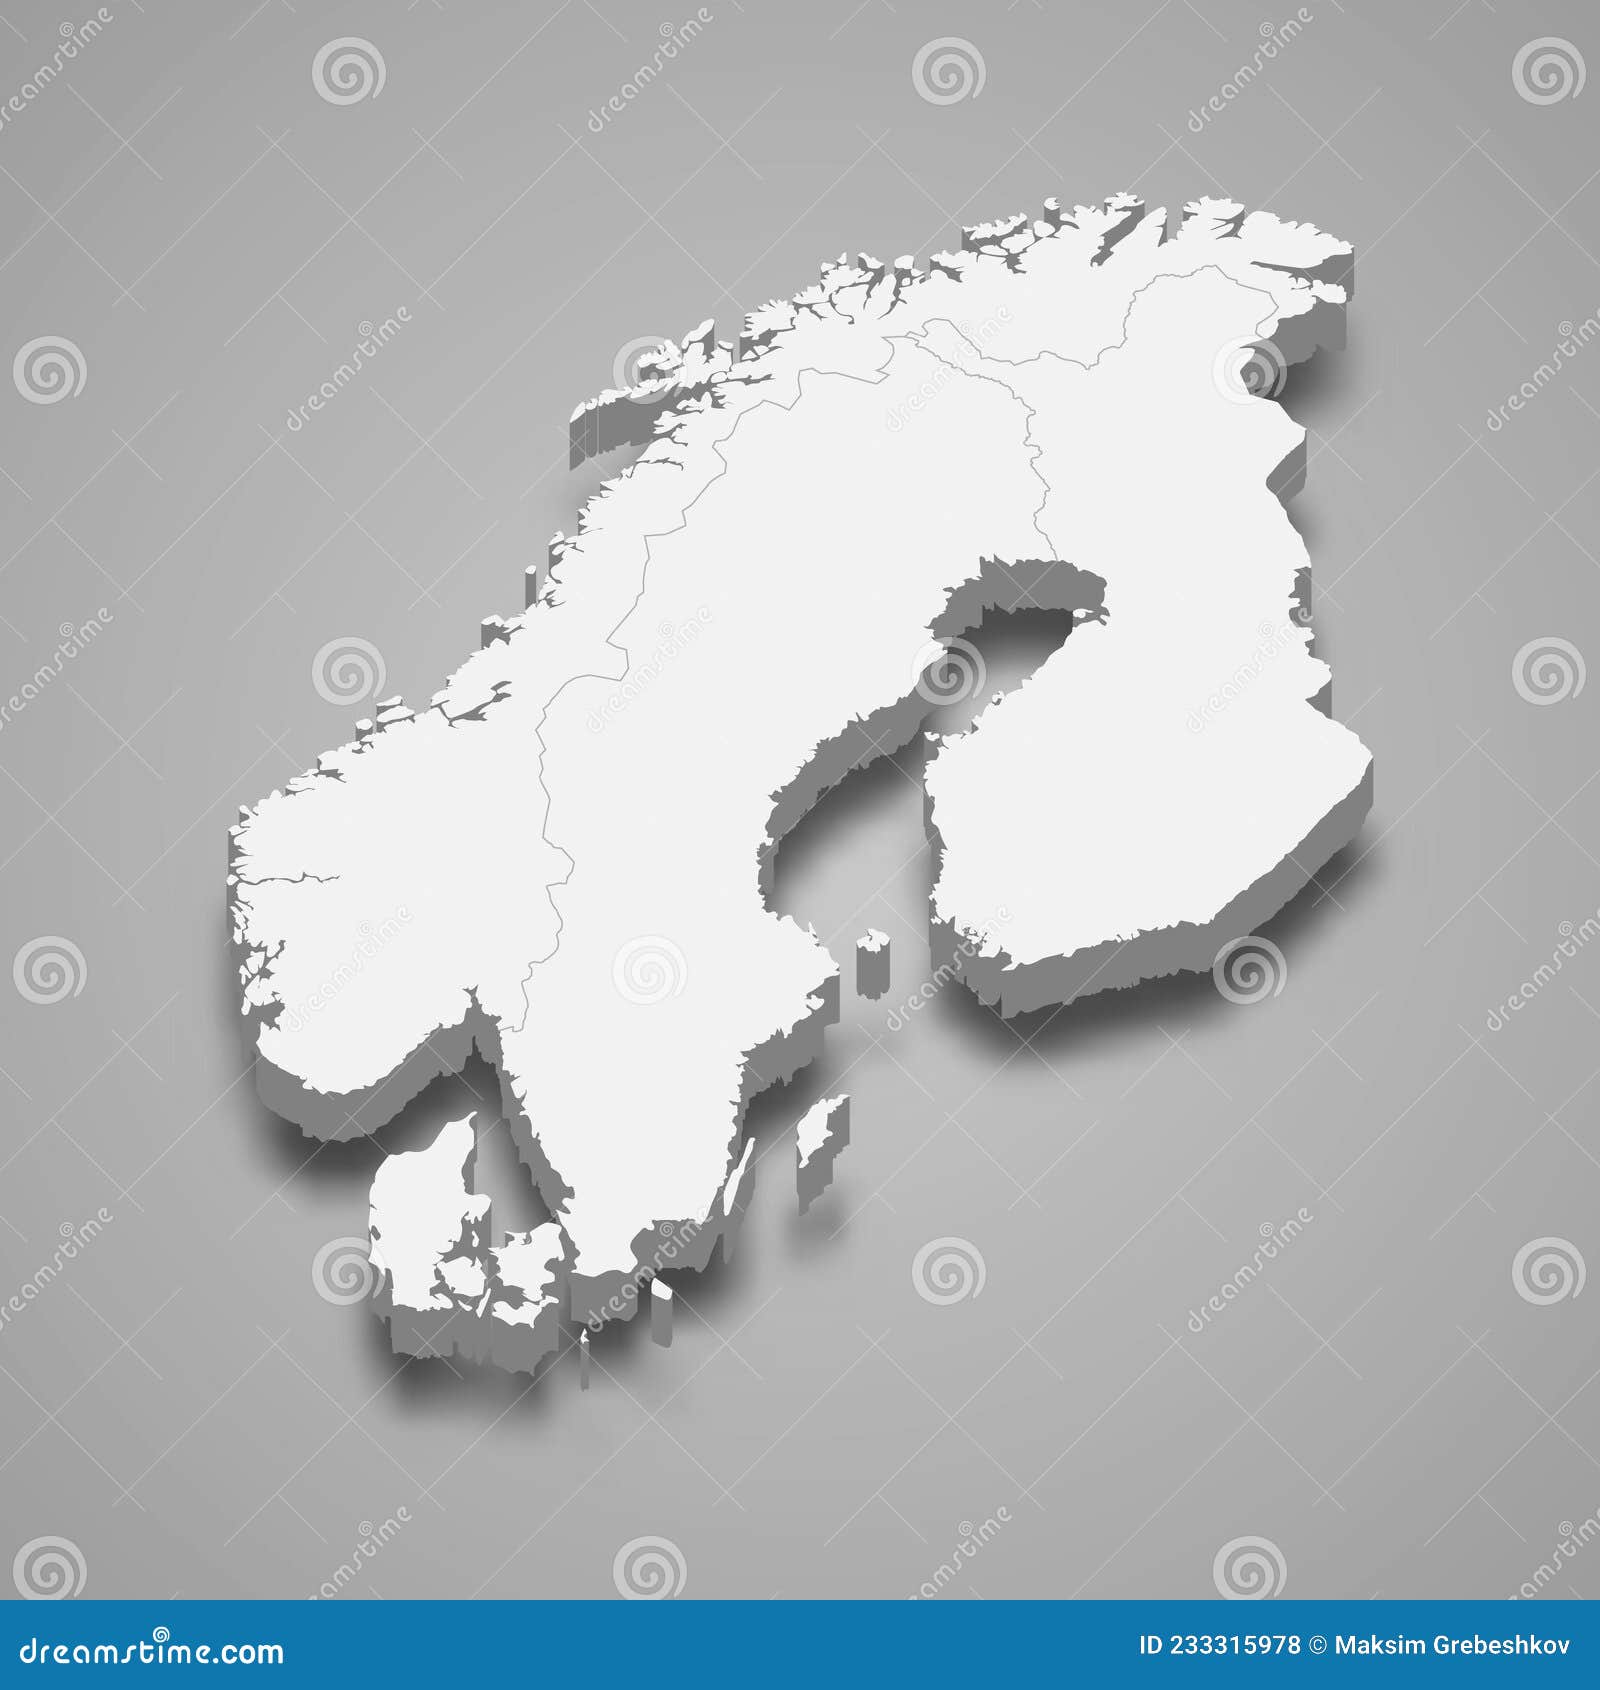 3d isometric map of scandinavia region,  with shadow